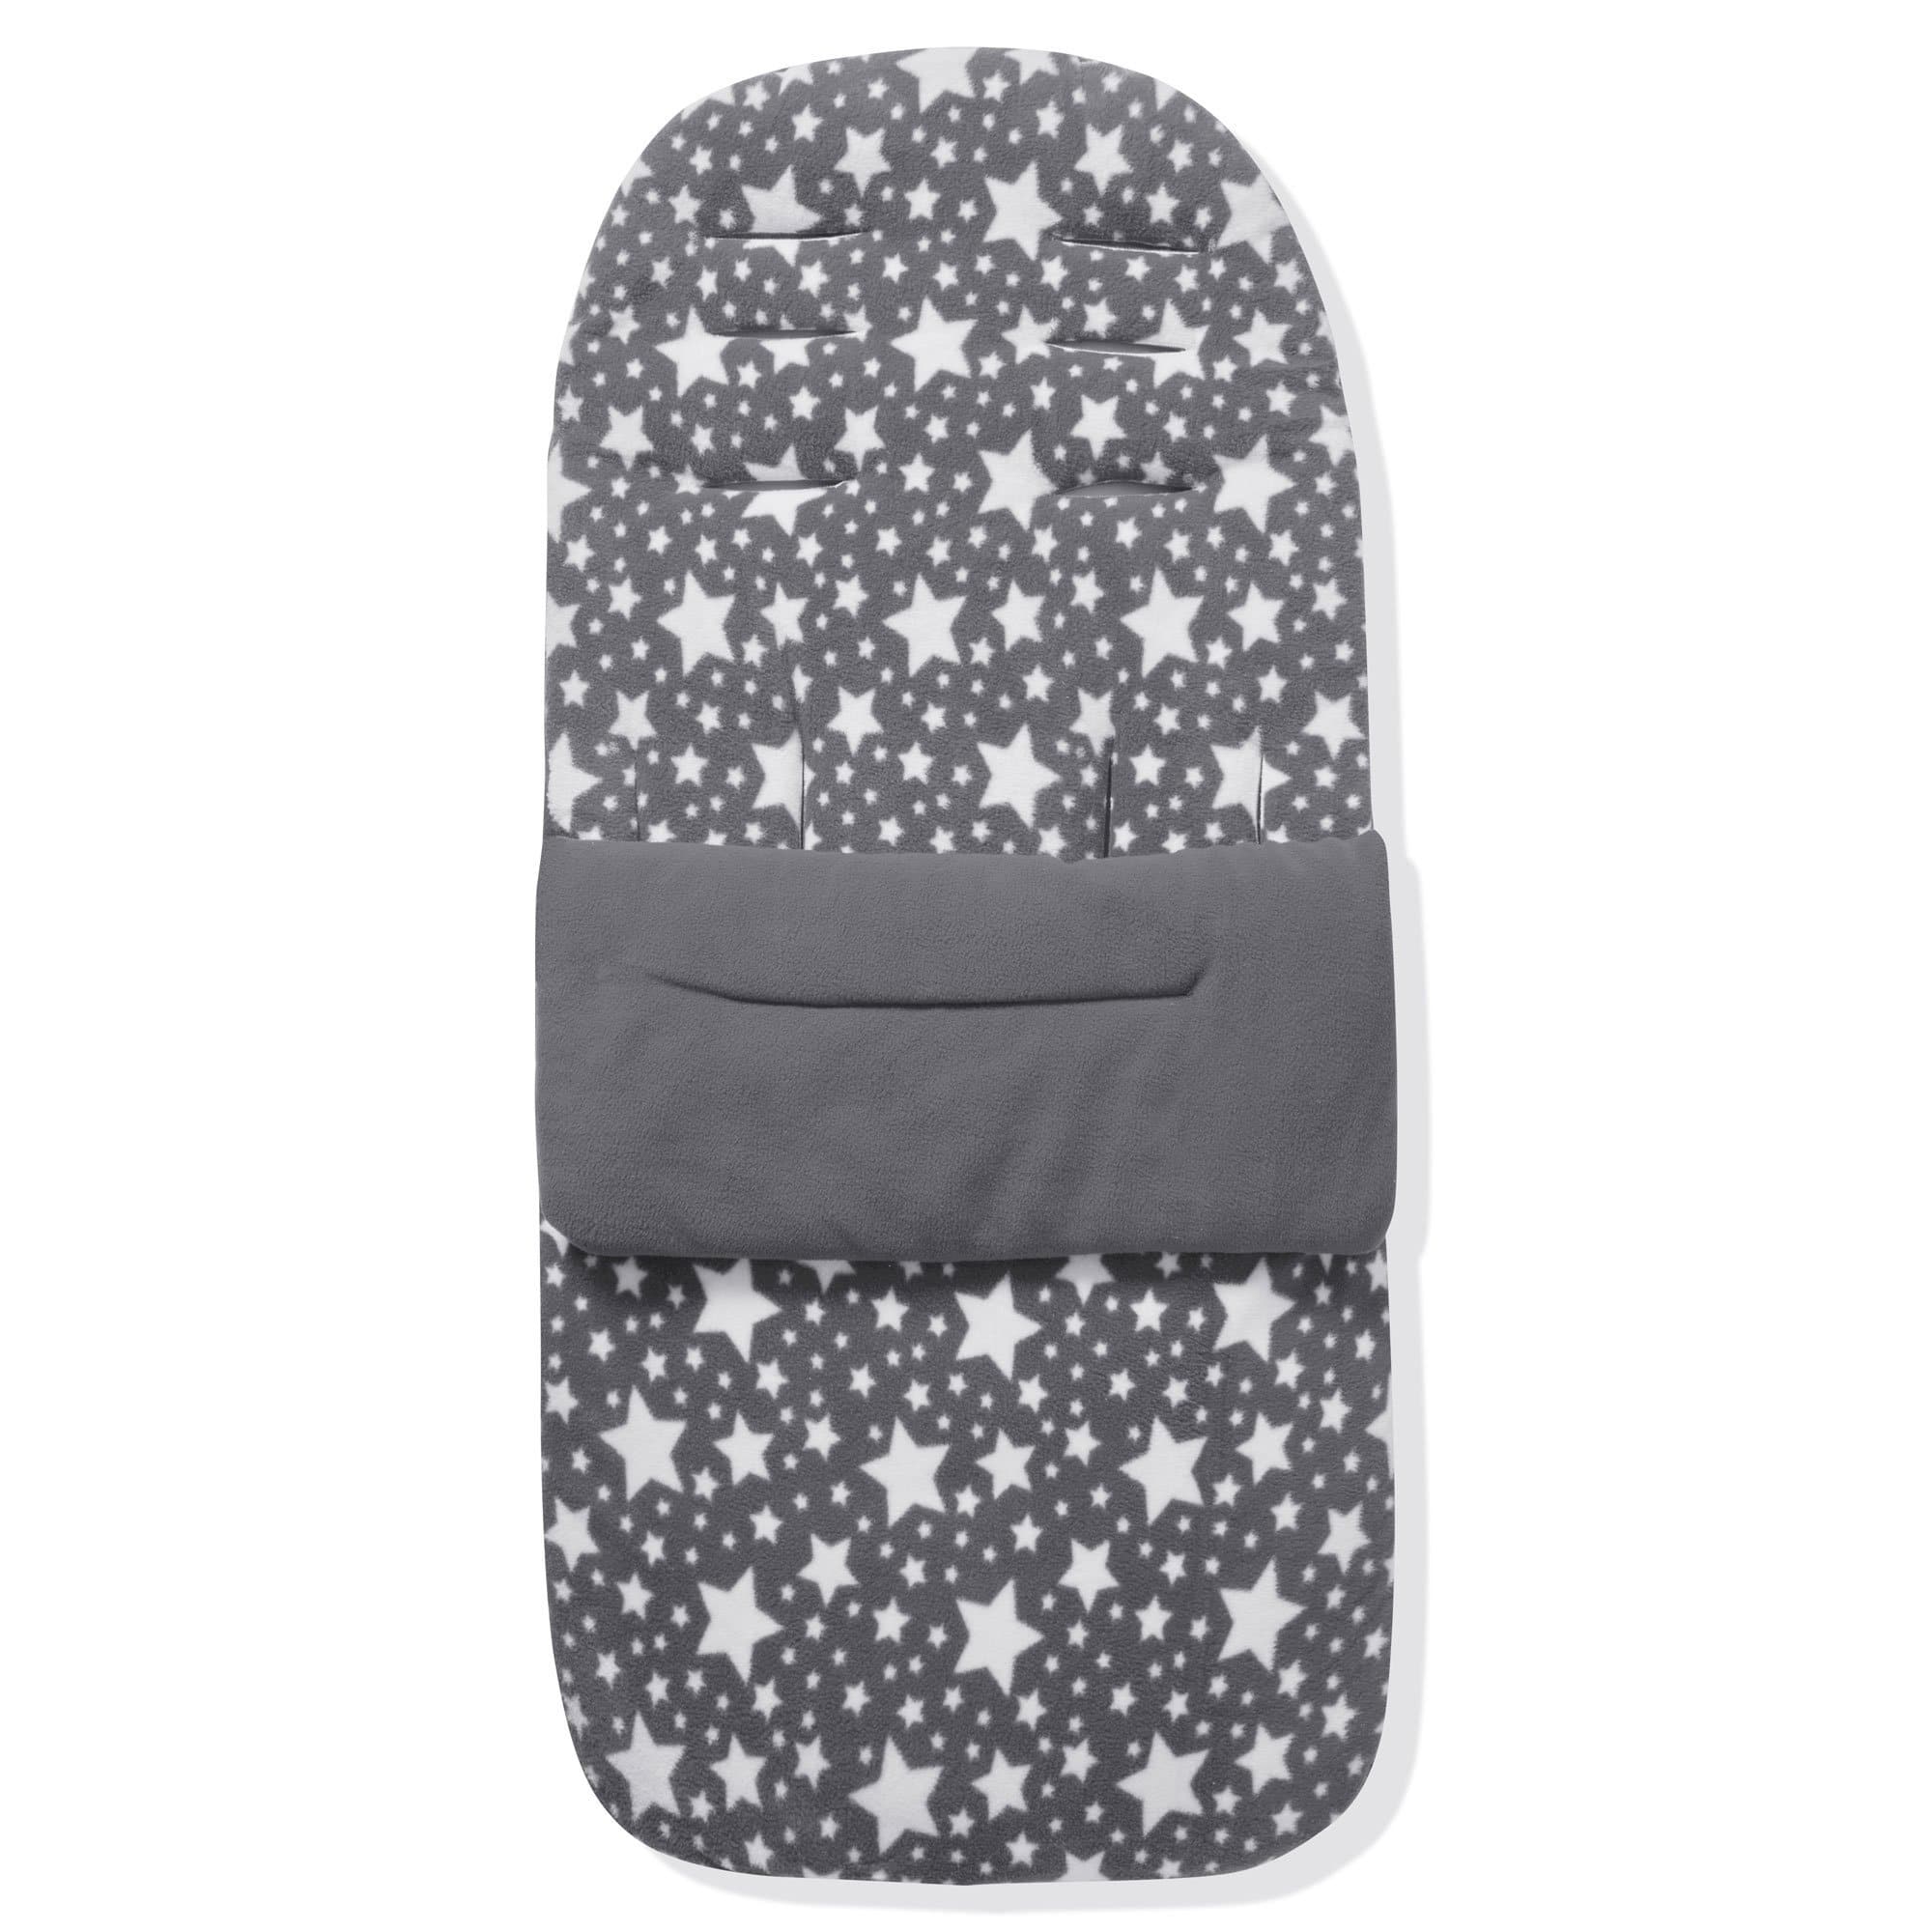 Fleece Footmuff / Cosy Toes Compatible with Silver Cross - Grey Star / Fits All Models | For Your Little One